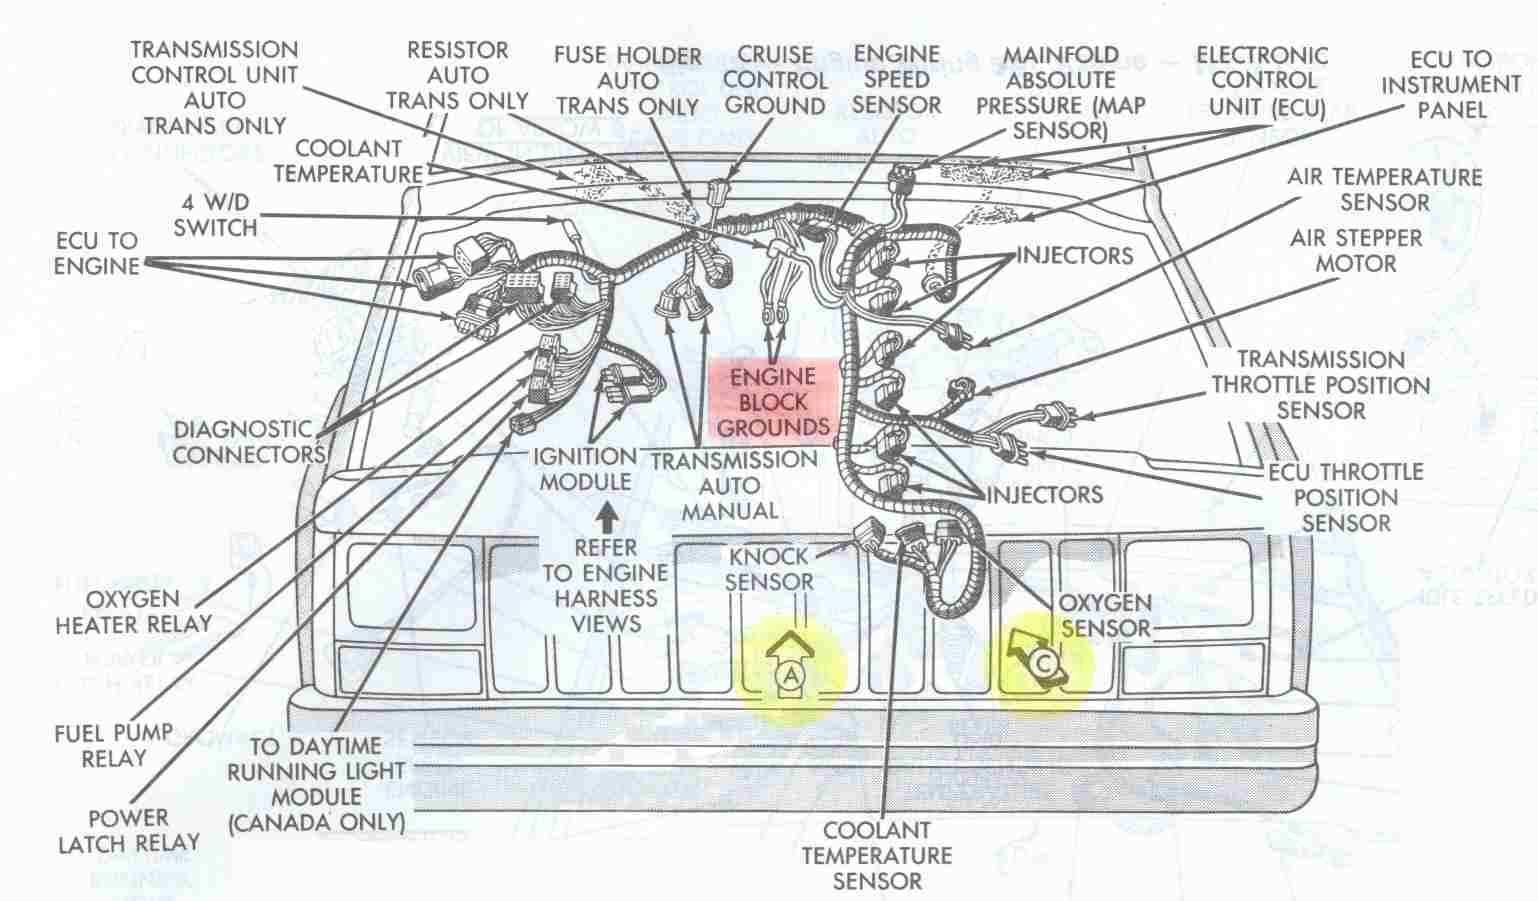 Electrical_Engine_Ground_Points_Overview.jpg